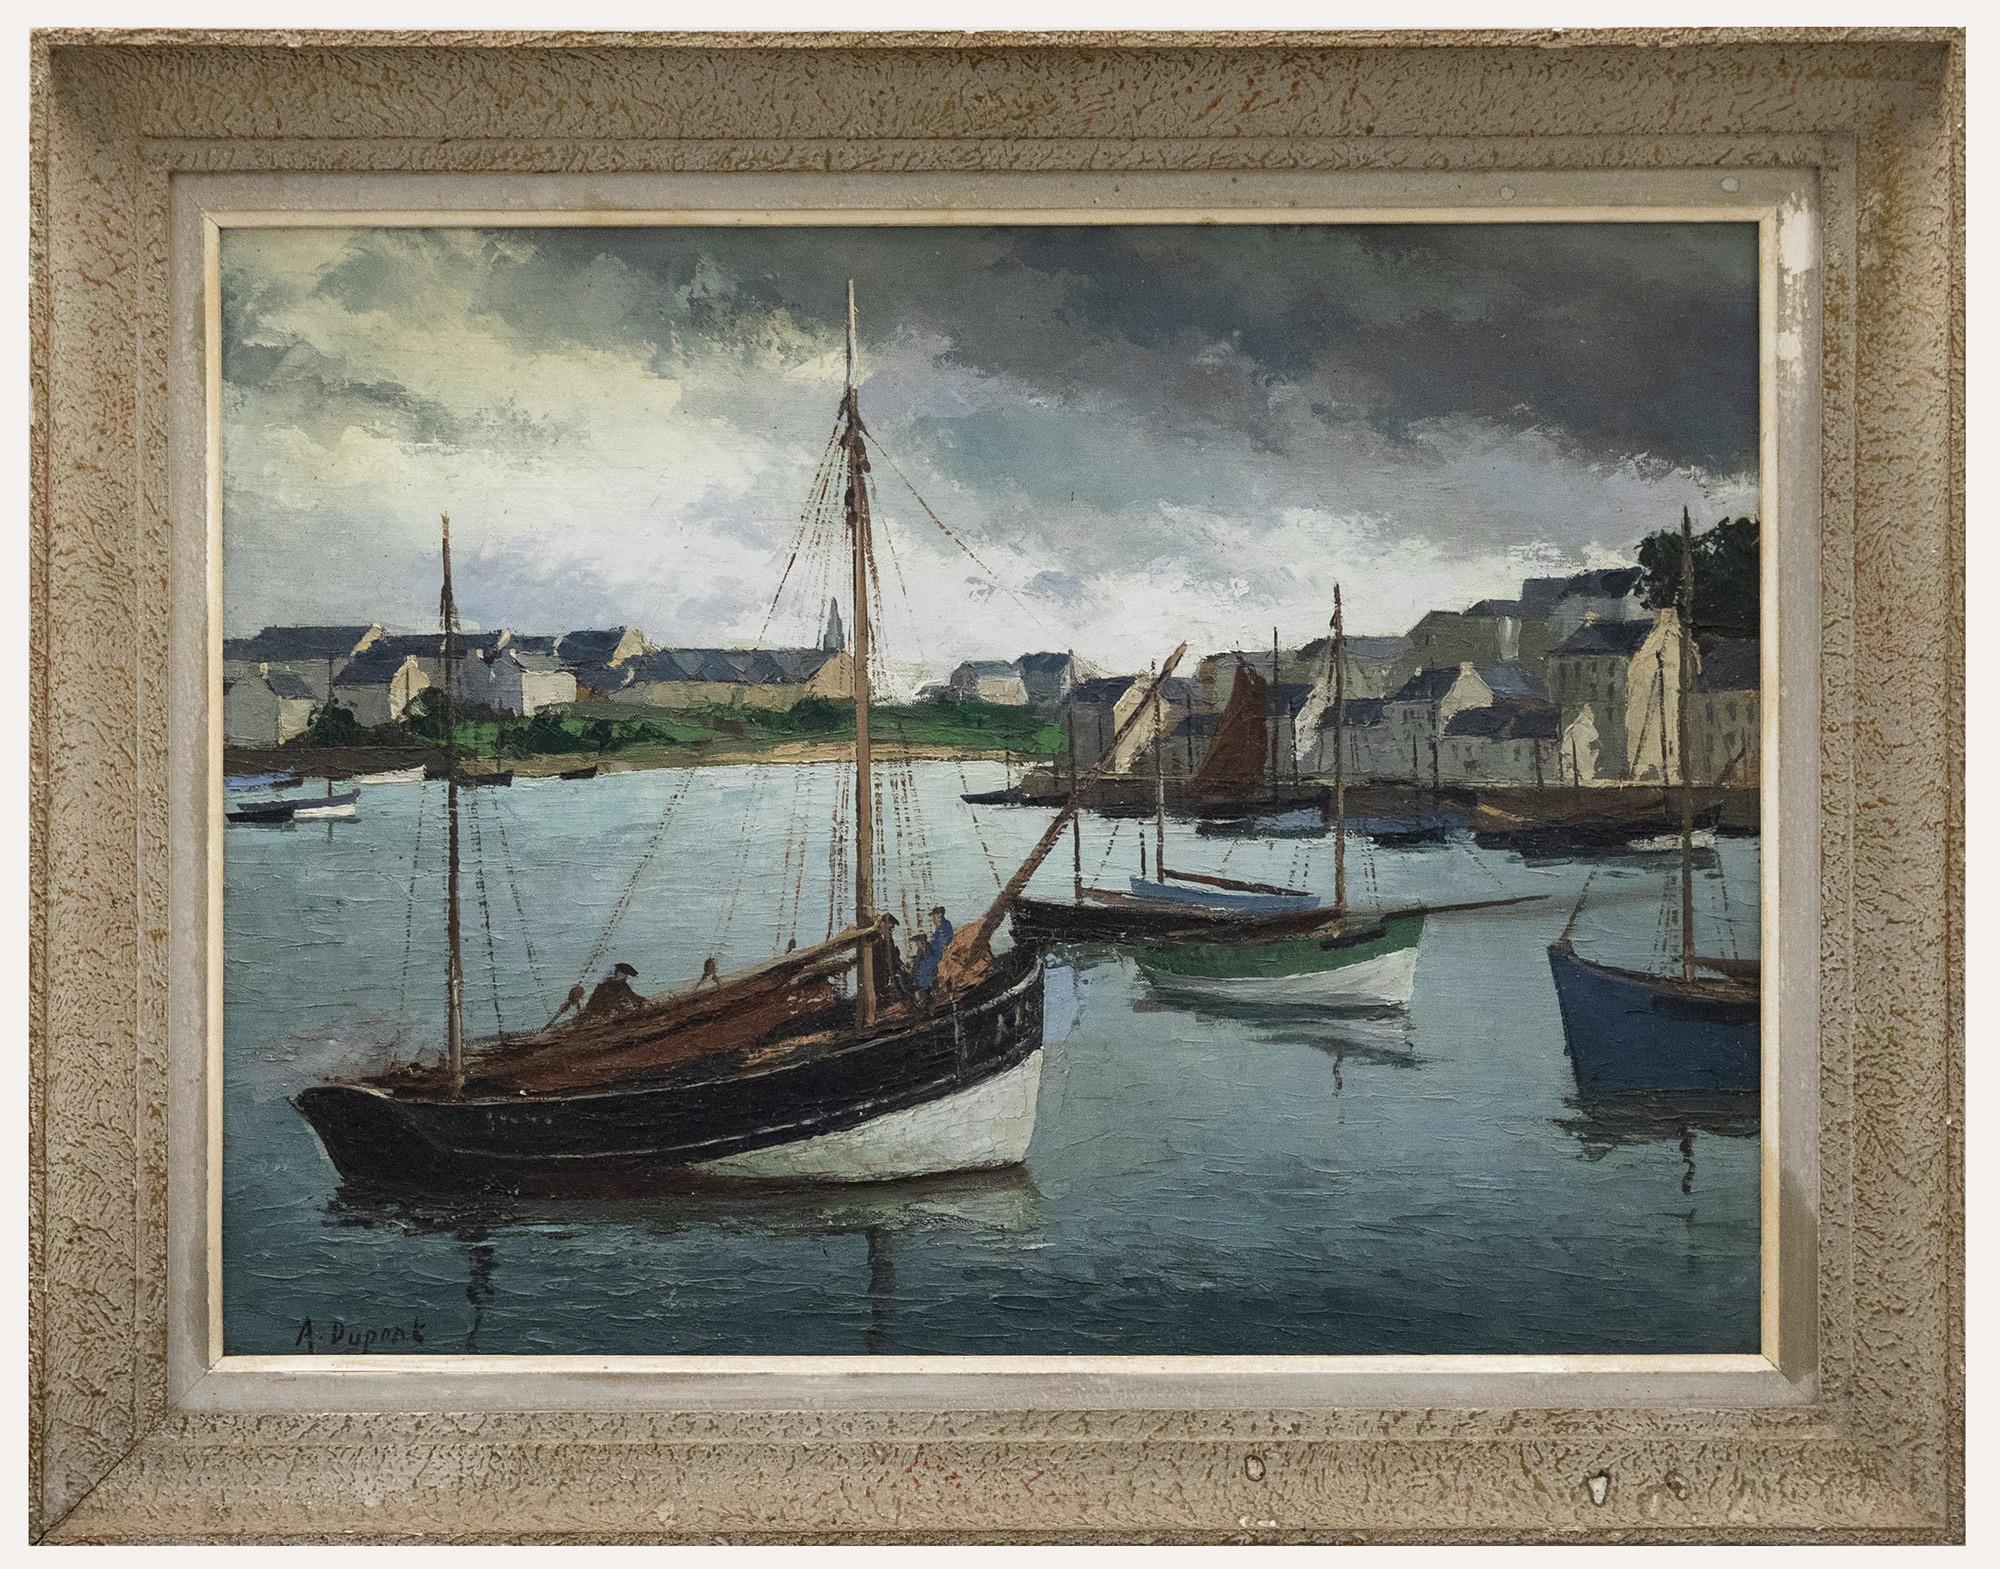 Unknown Figurative Painting - A. Dupont  - Early 20th Century Oil, French Harbour